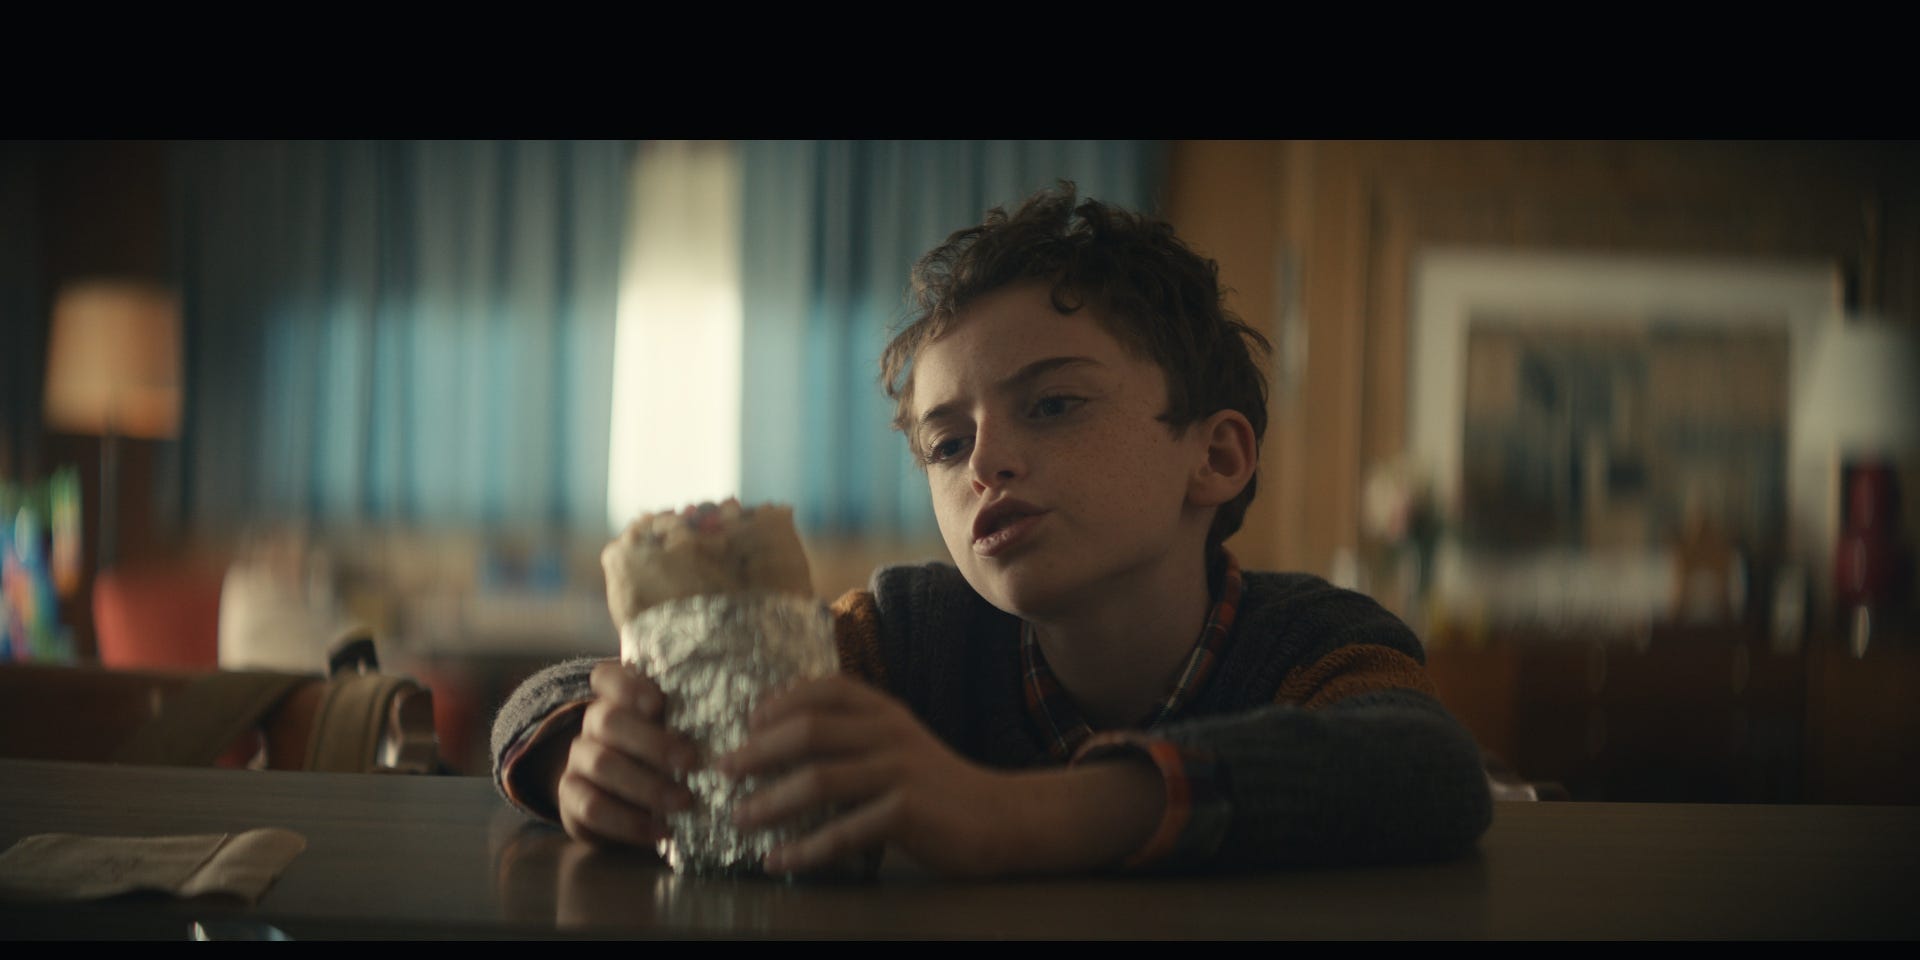 Chipotle is running its first-ever Super Bowl ad after a strong year that defied expectations